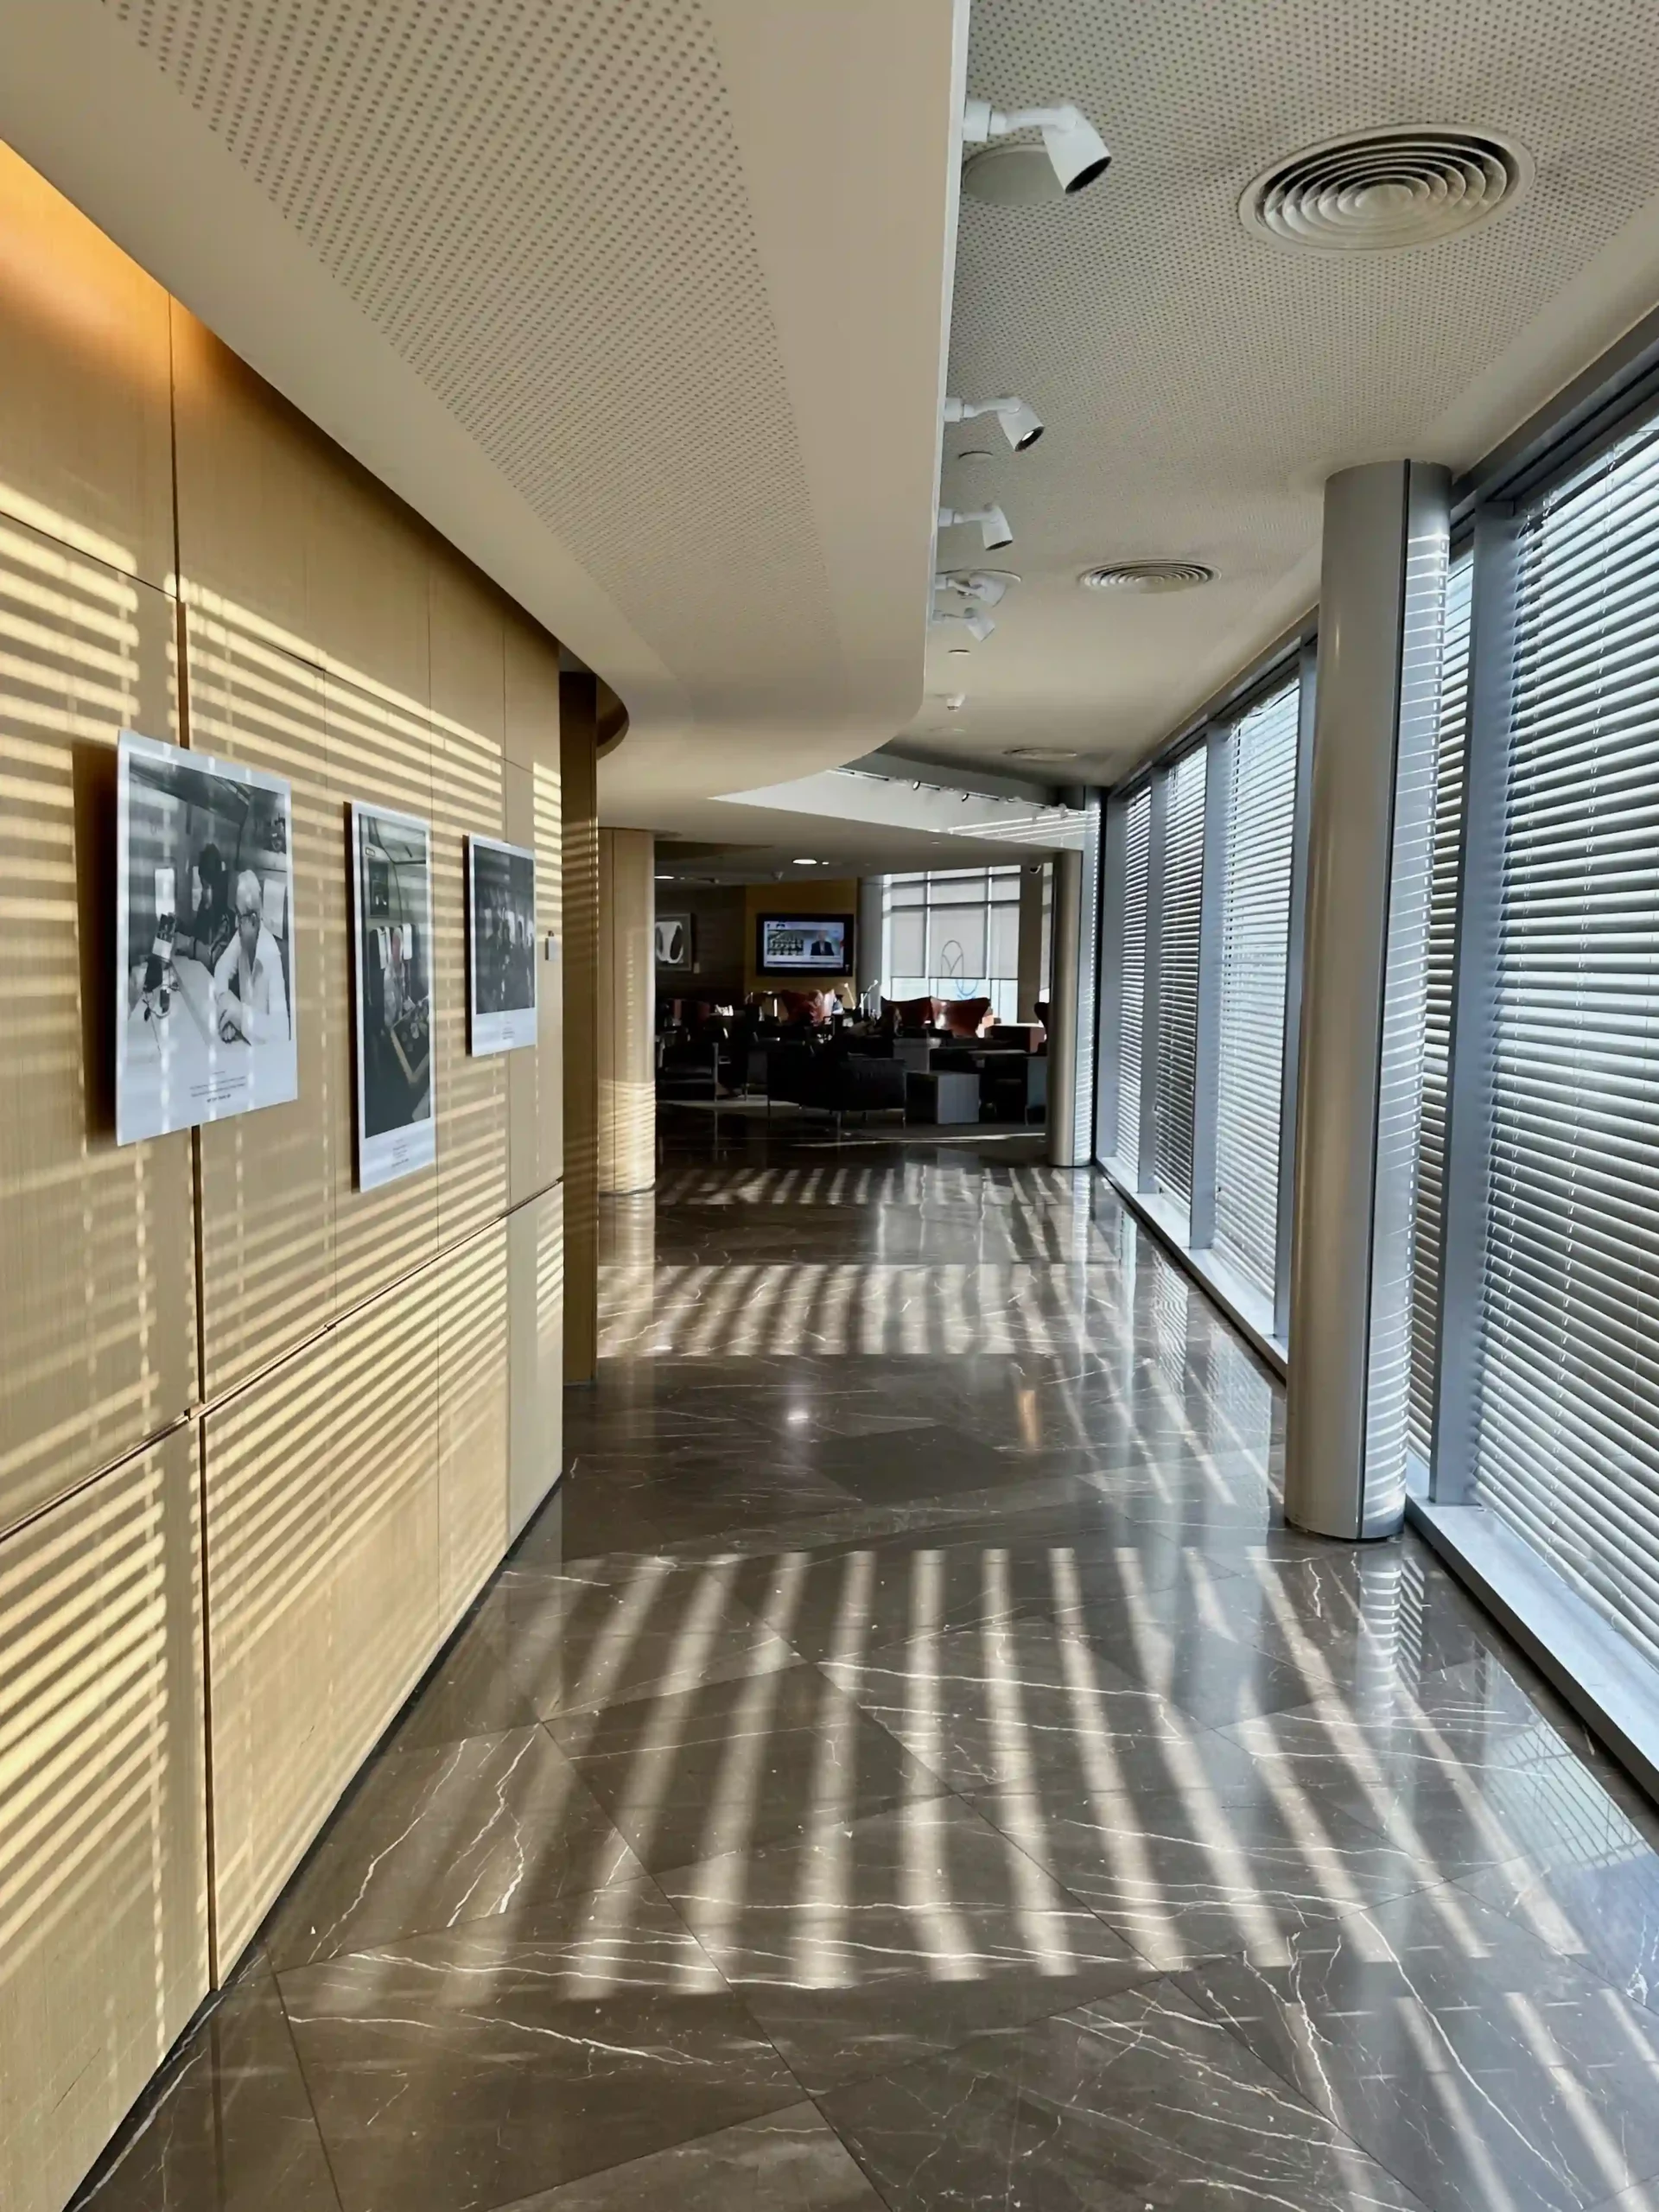 a hallway with blinds and pictures on the wall